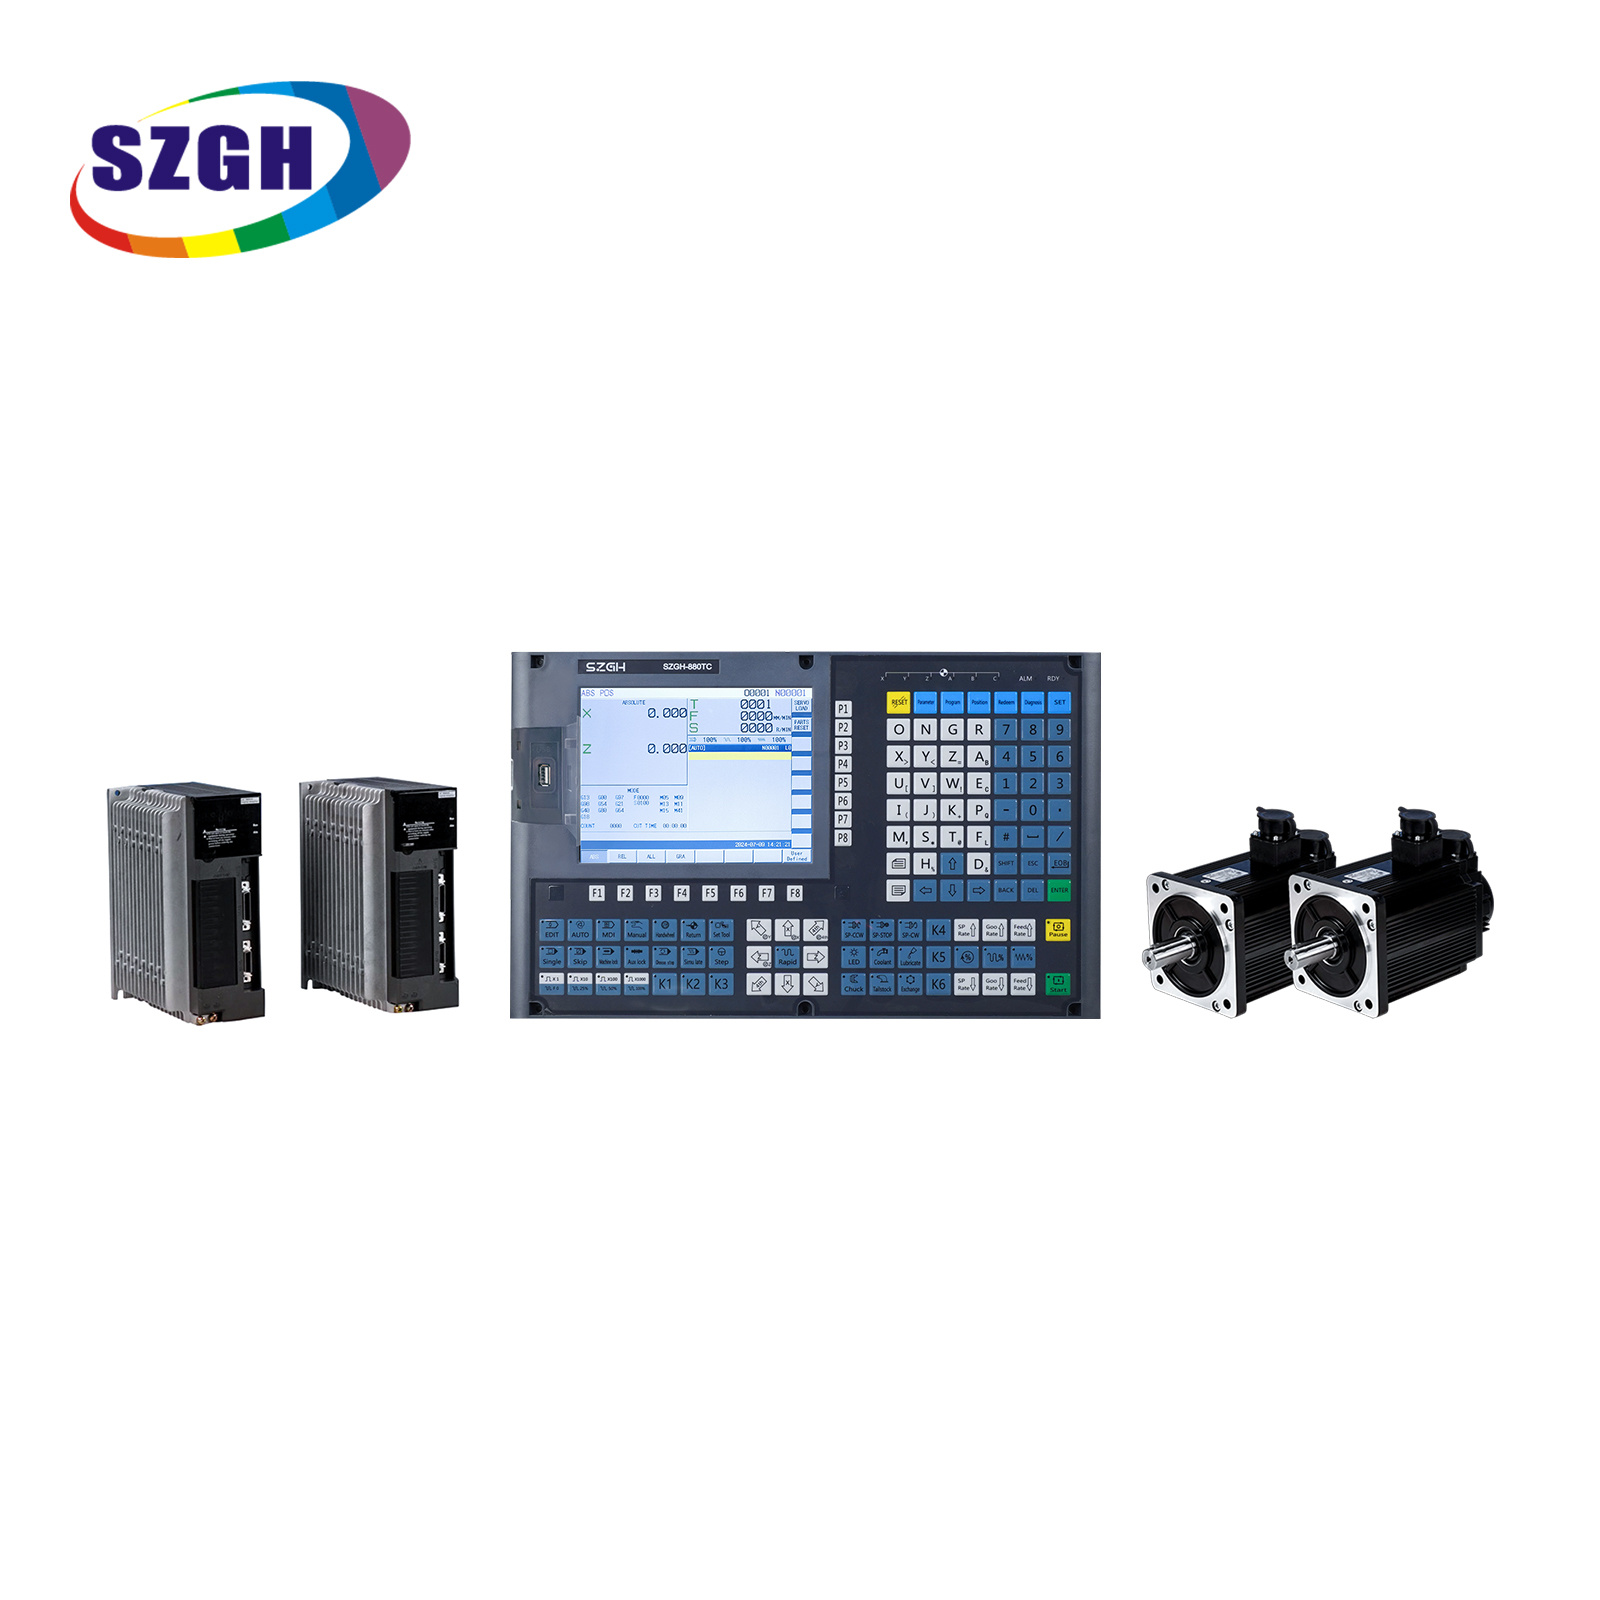 News:SZGH's latest economical lathe controller  have been launched